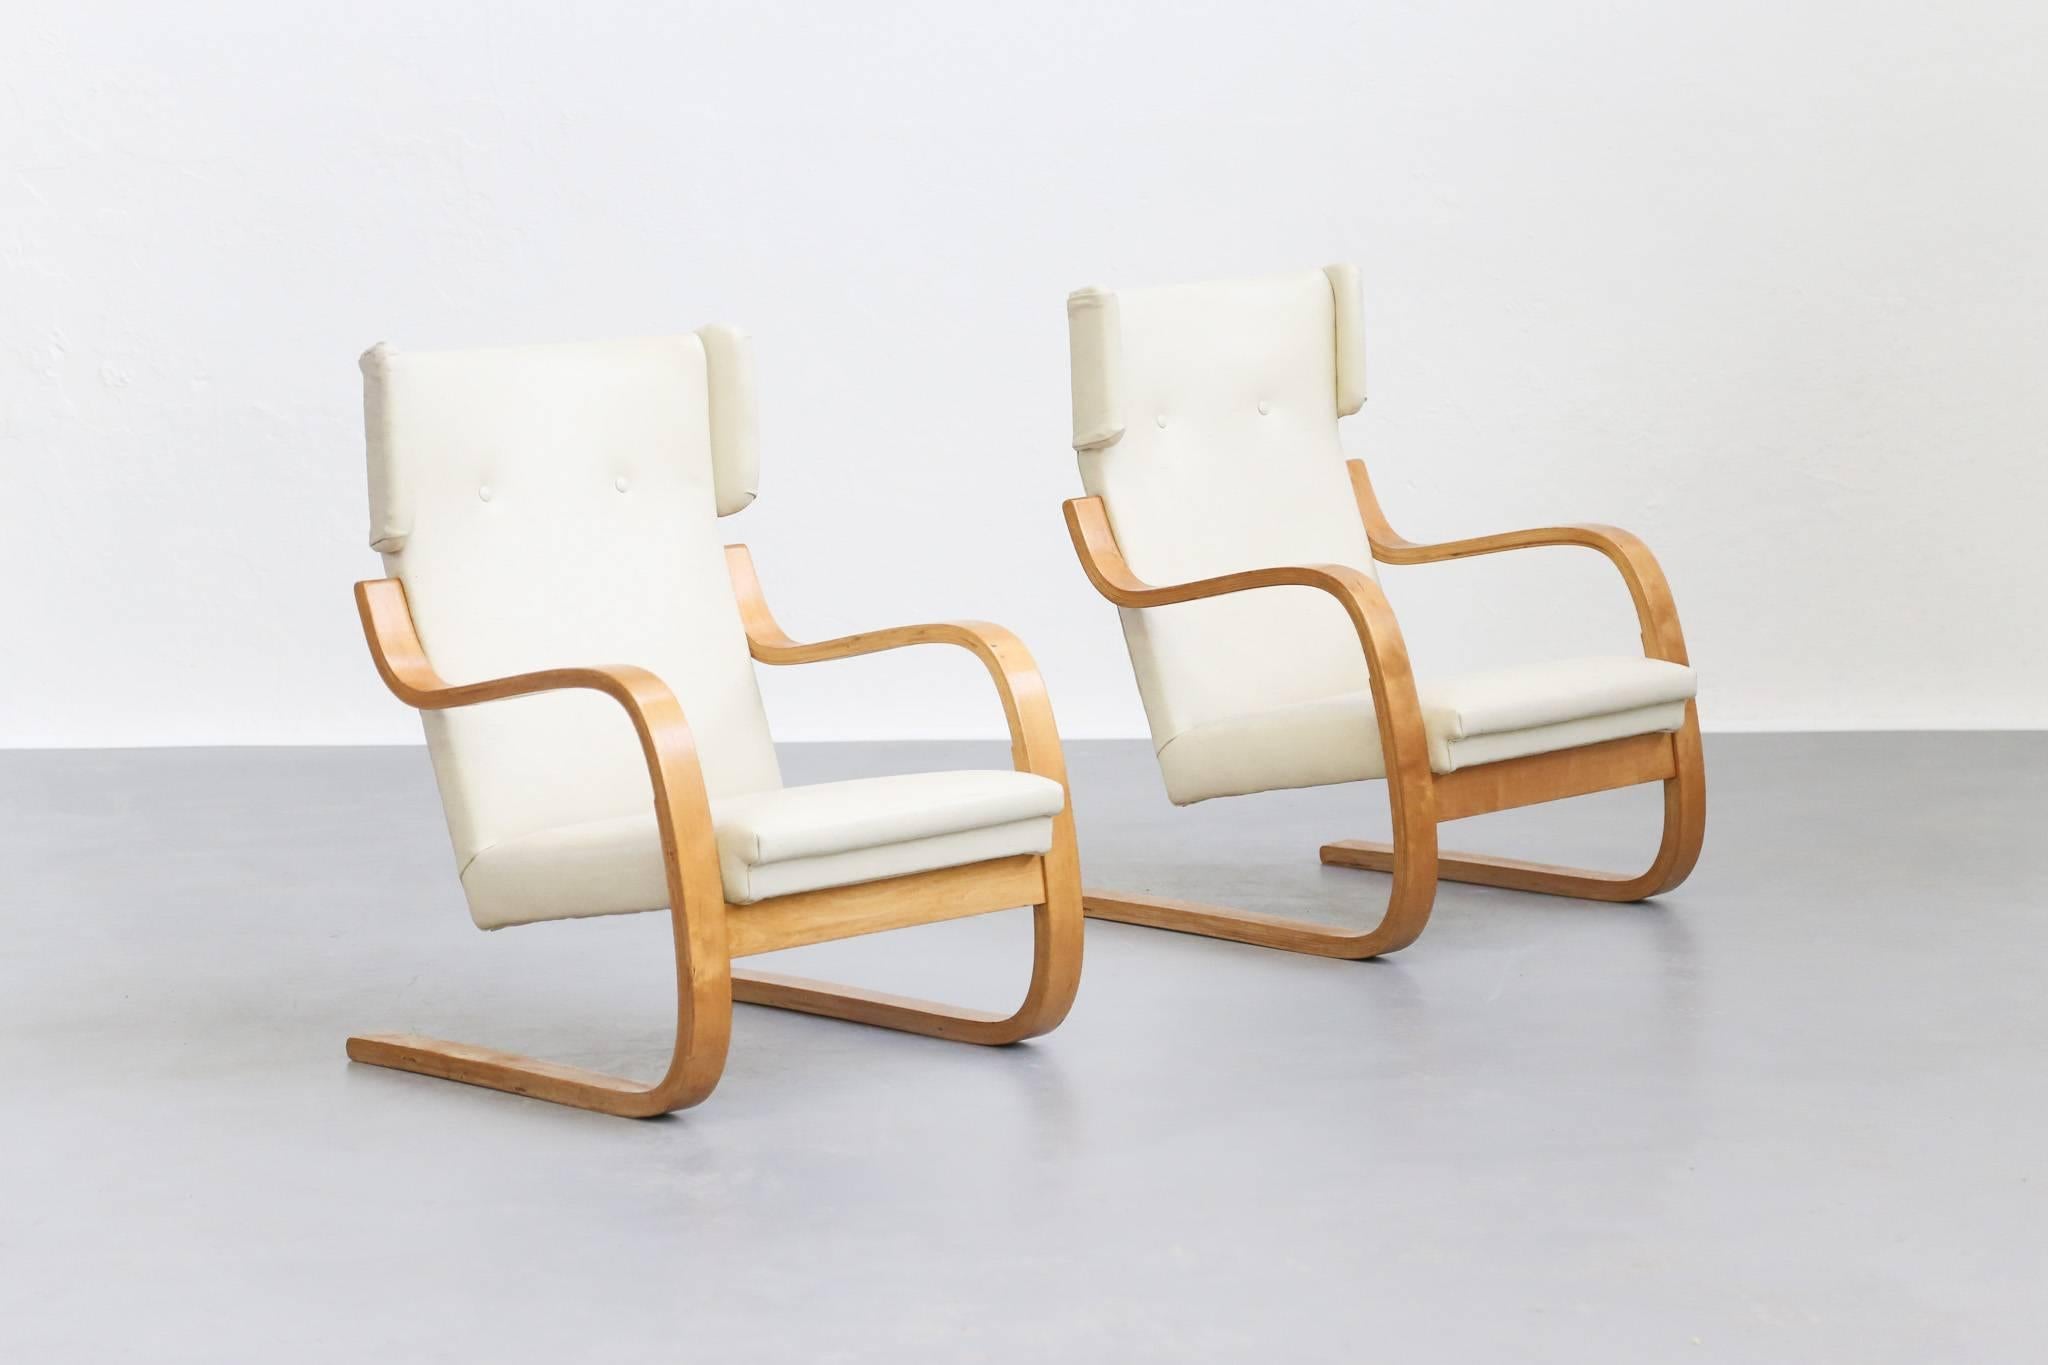 Leather Pair of Lounge Chairs Model 401 by Alvar Aalto, 1935 Finland Design